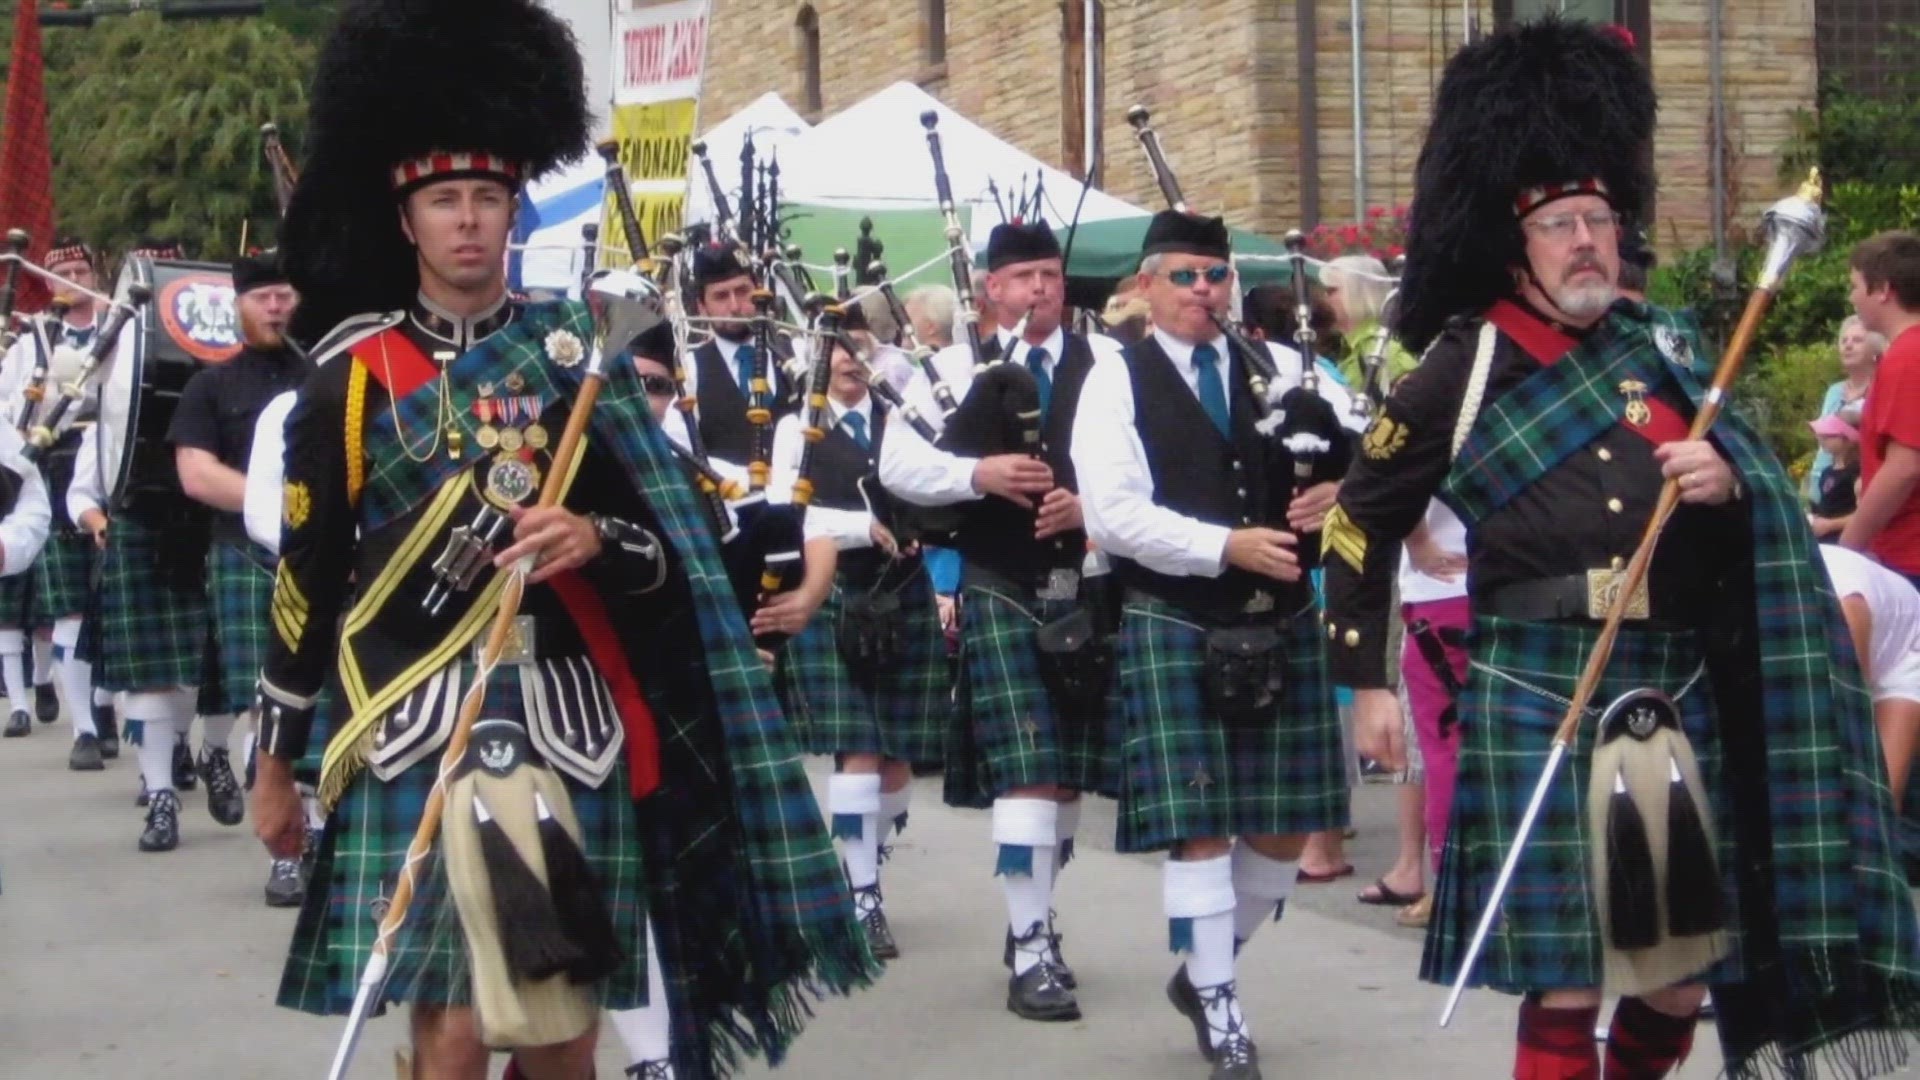 On Sept. 30, Dandridge will host their annual Scots-Irish Festival, which is free to the public.